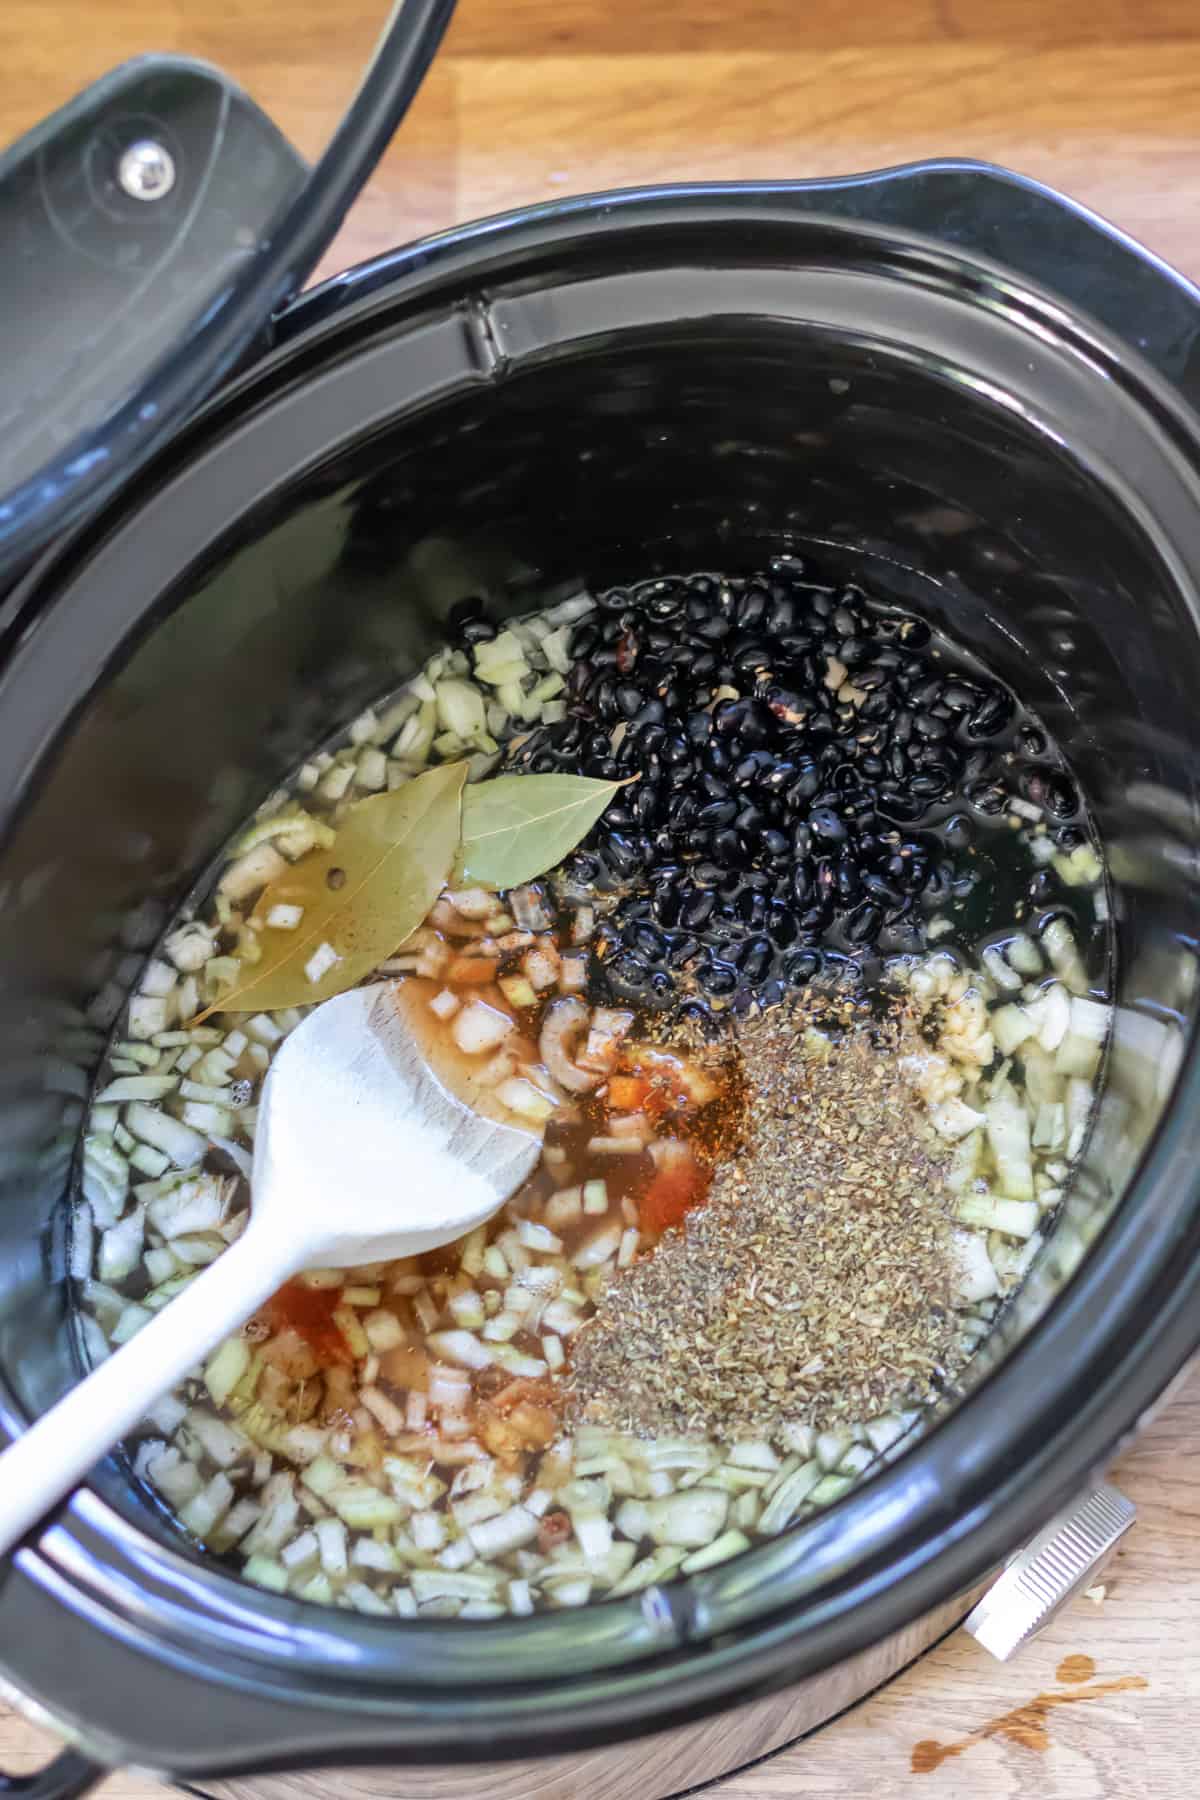 Stirring ingredients in a slow cooker bowl.